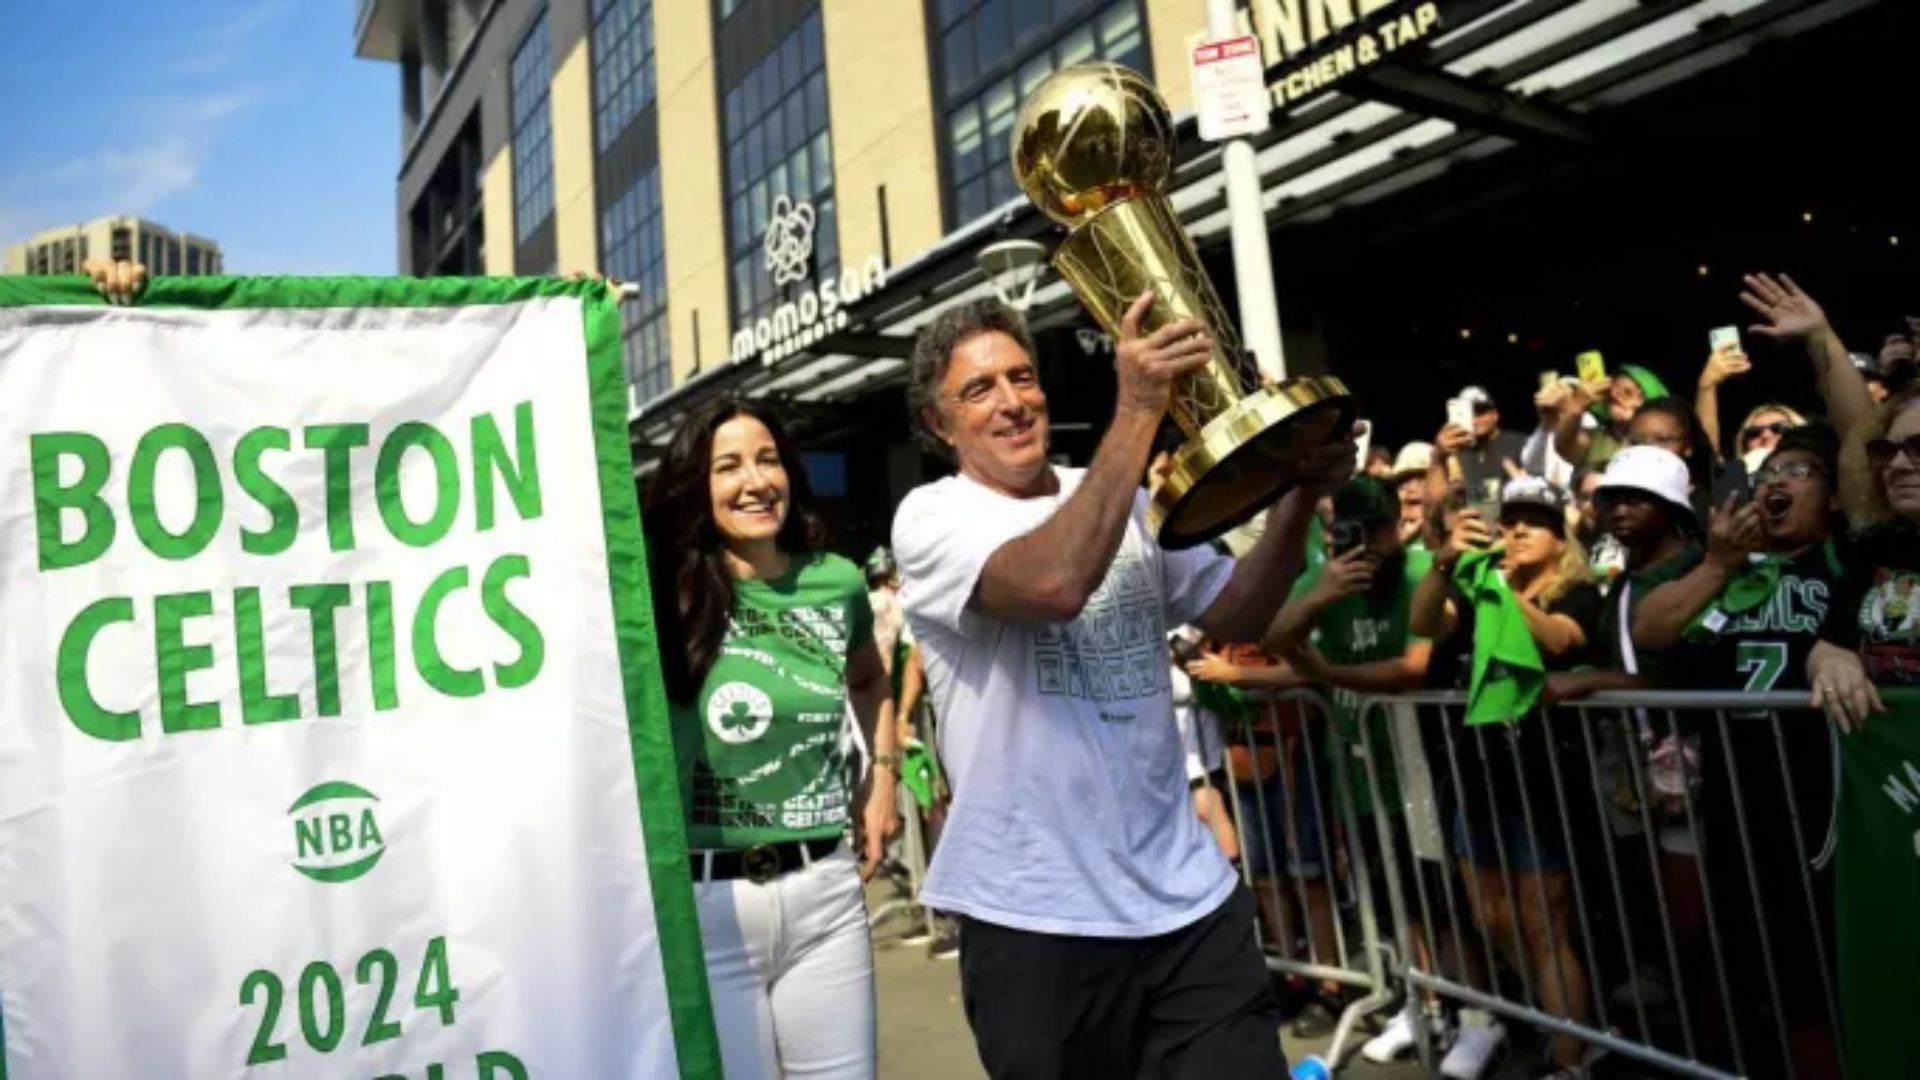 Celtics owners to sell storied nba franchise due to estate planning